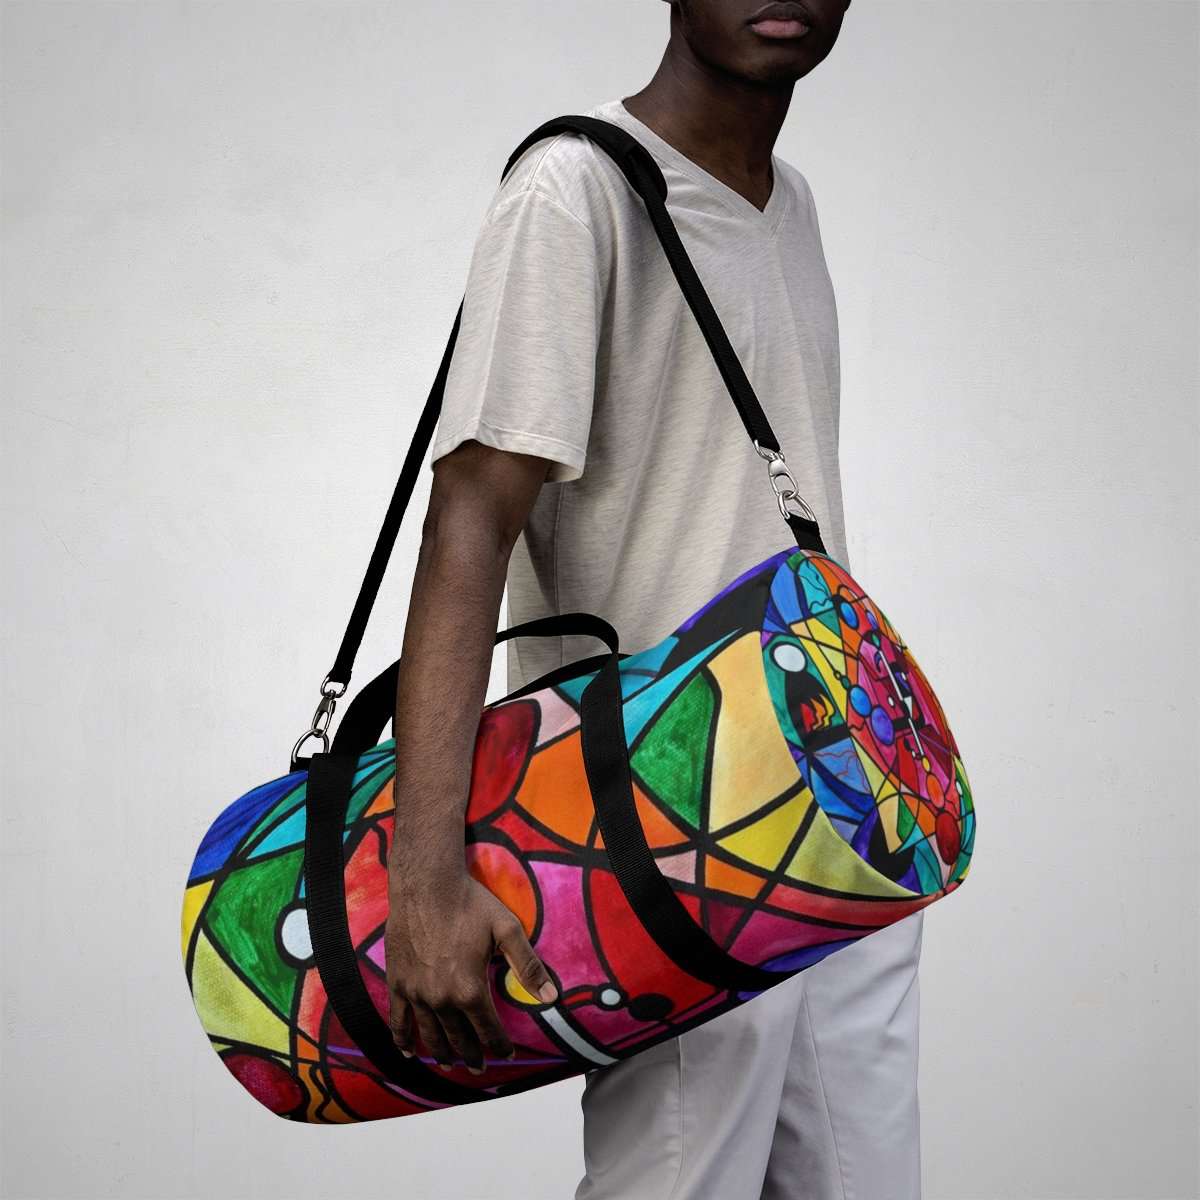 the-best-website-for-buying-wholesale-arcturian-divine-order-grid-duffle-bag-on-sale_11.jpg